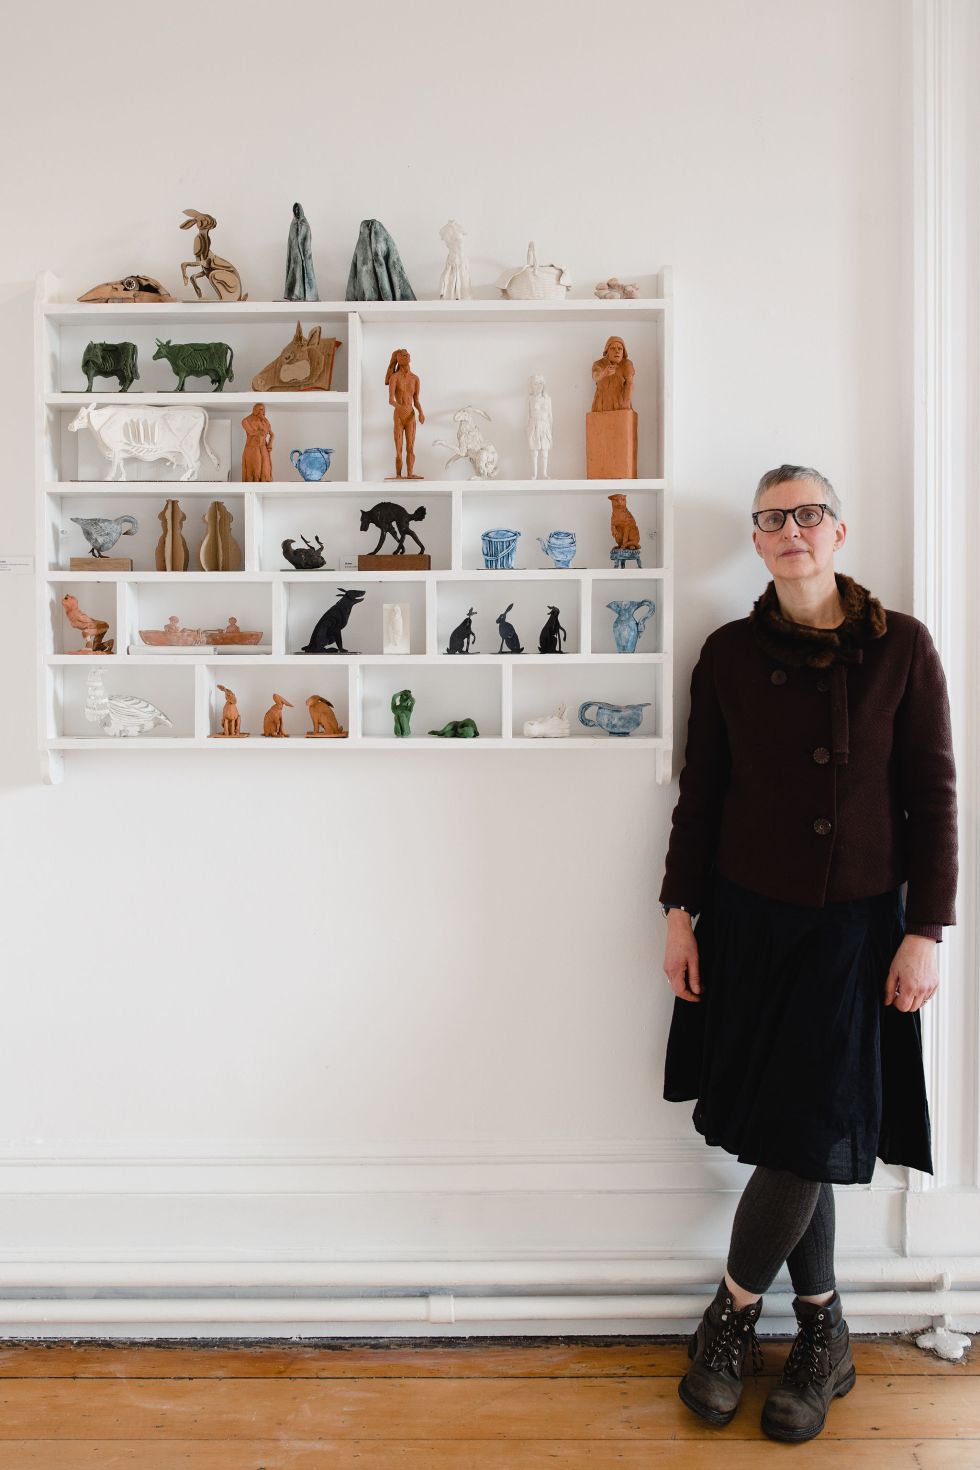 Marjan Wouda standing beside a shelf with her sculpture pieces on display at The Whitaker. Photo by Christina Davies, Fish 2 Photography.